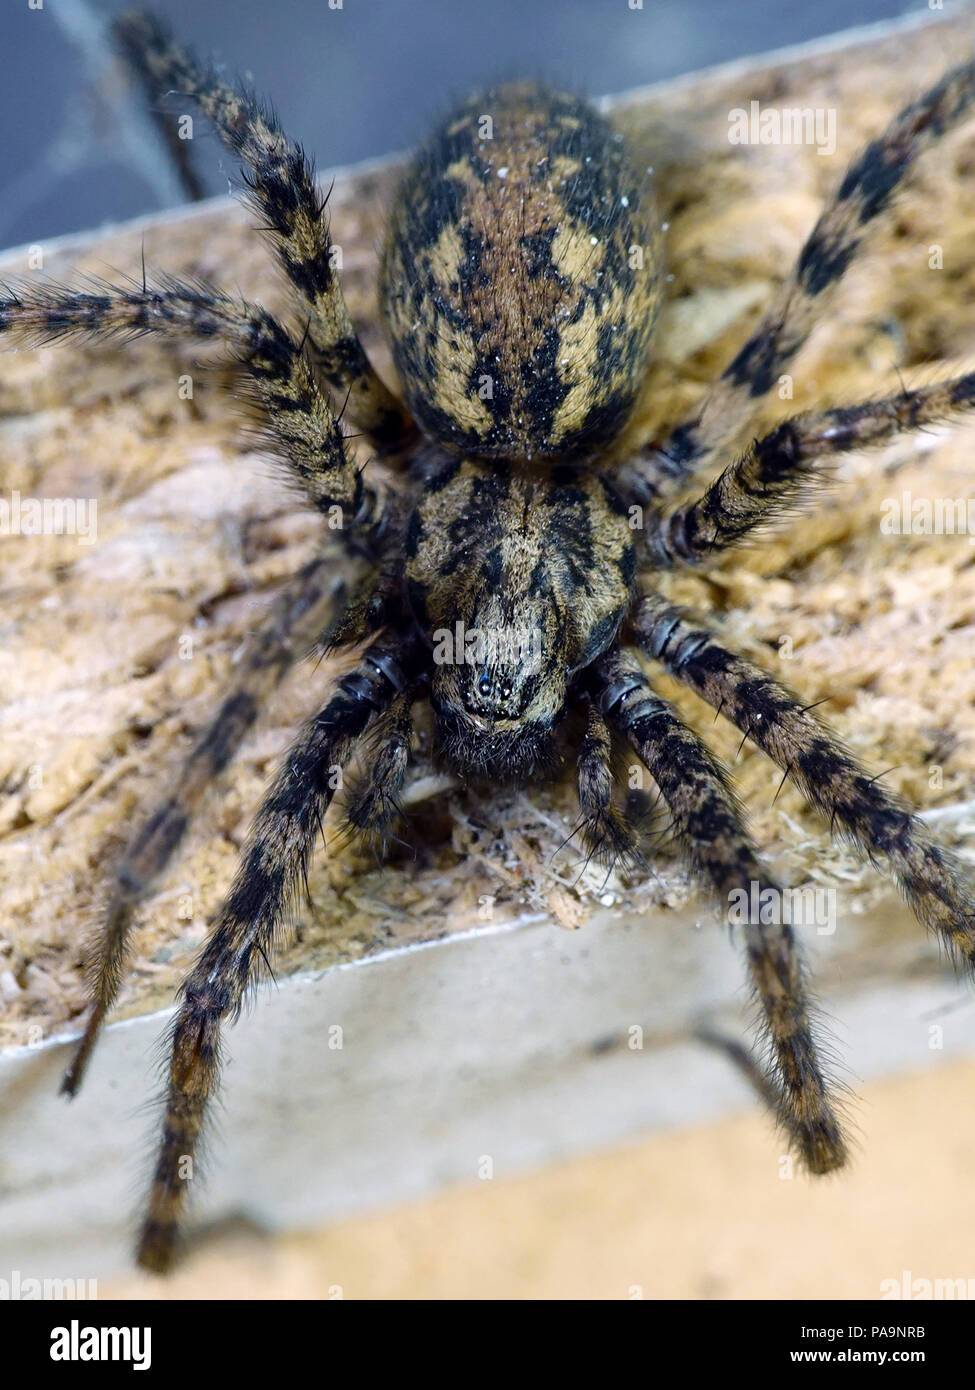 Closeup image of the Giant house spider seen from above Stock Photo